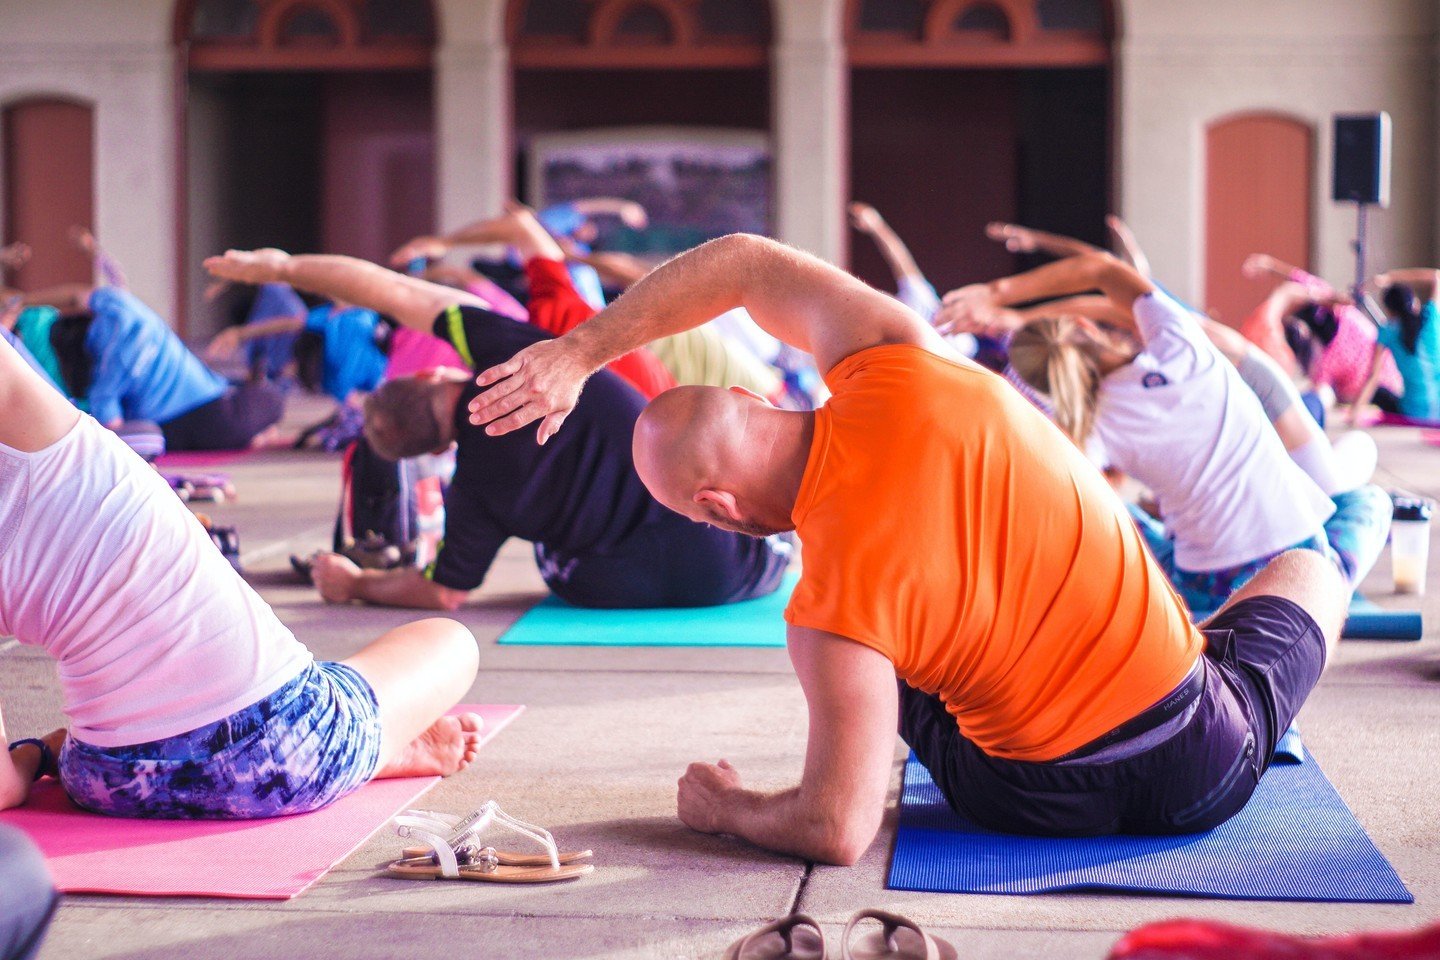 Join us for YOGA, every Tuesday from 5:30-6:30pm

Suitable for all levels, this Hatha Yoga Flow will focus on linking  breath to movement, deep stretching, building core strength and improving balance and overall well being. Beginners and experienced